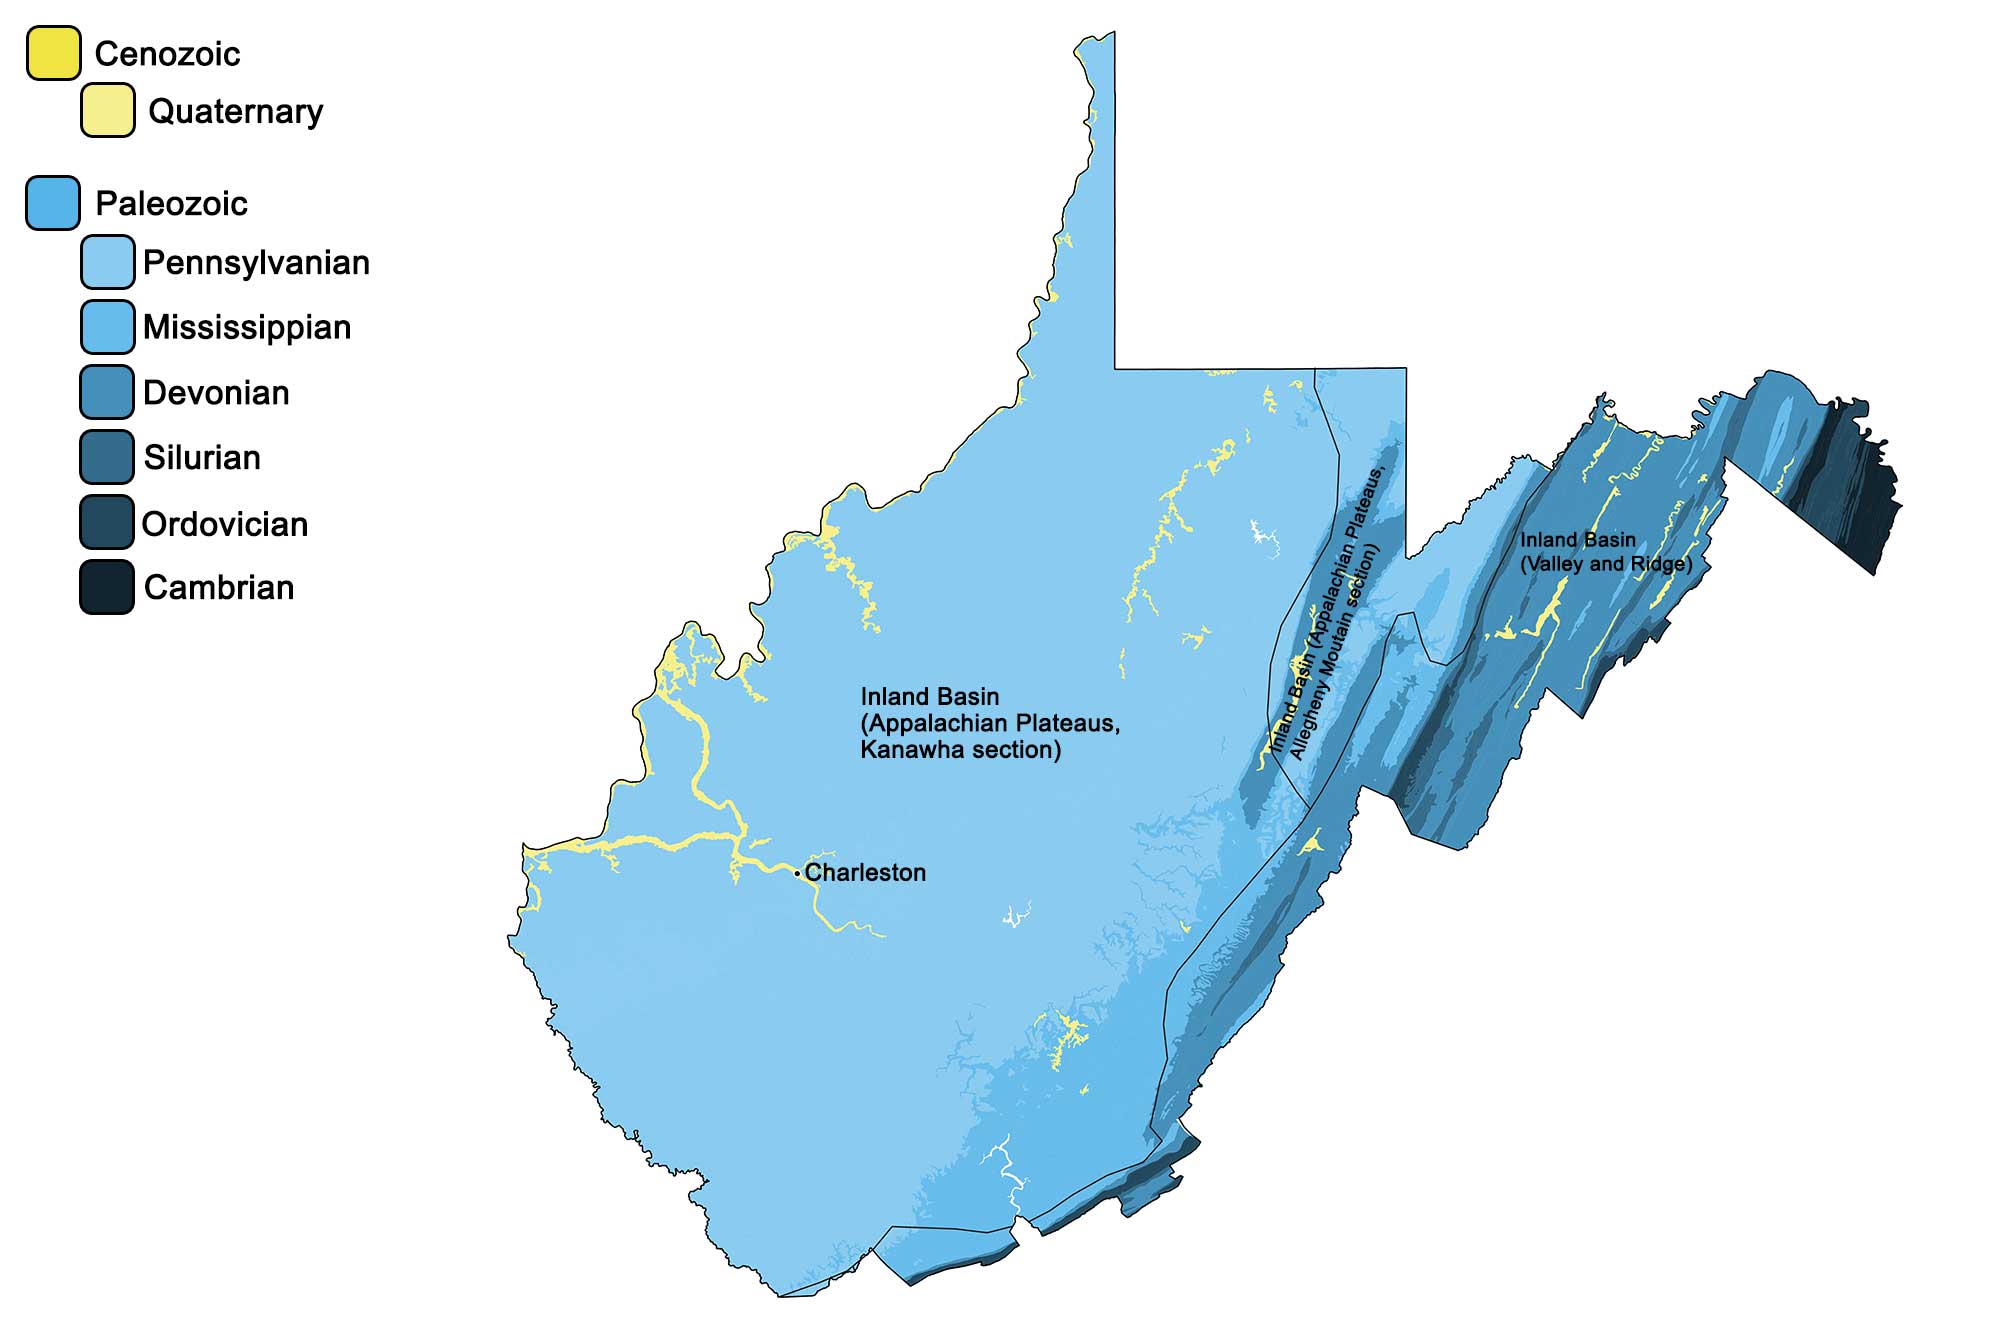 Geologic map of West Virginia, with physiographic regions identified.